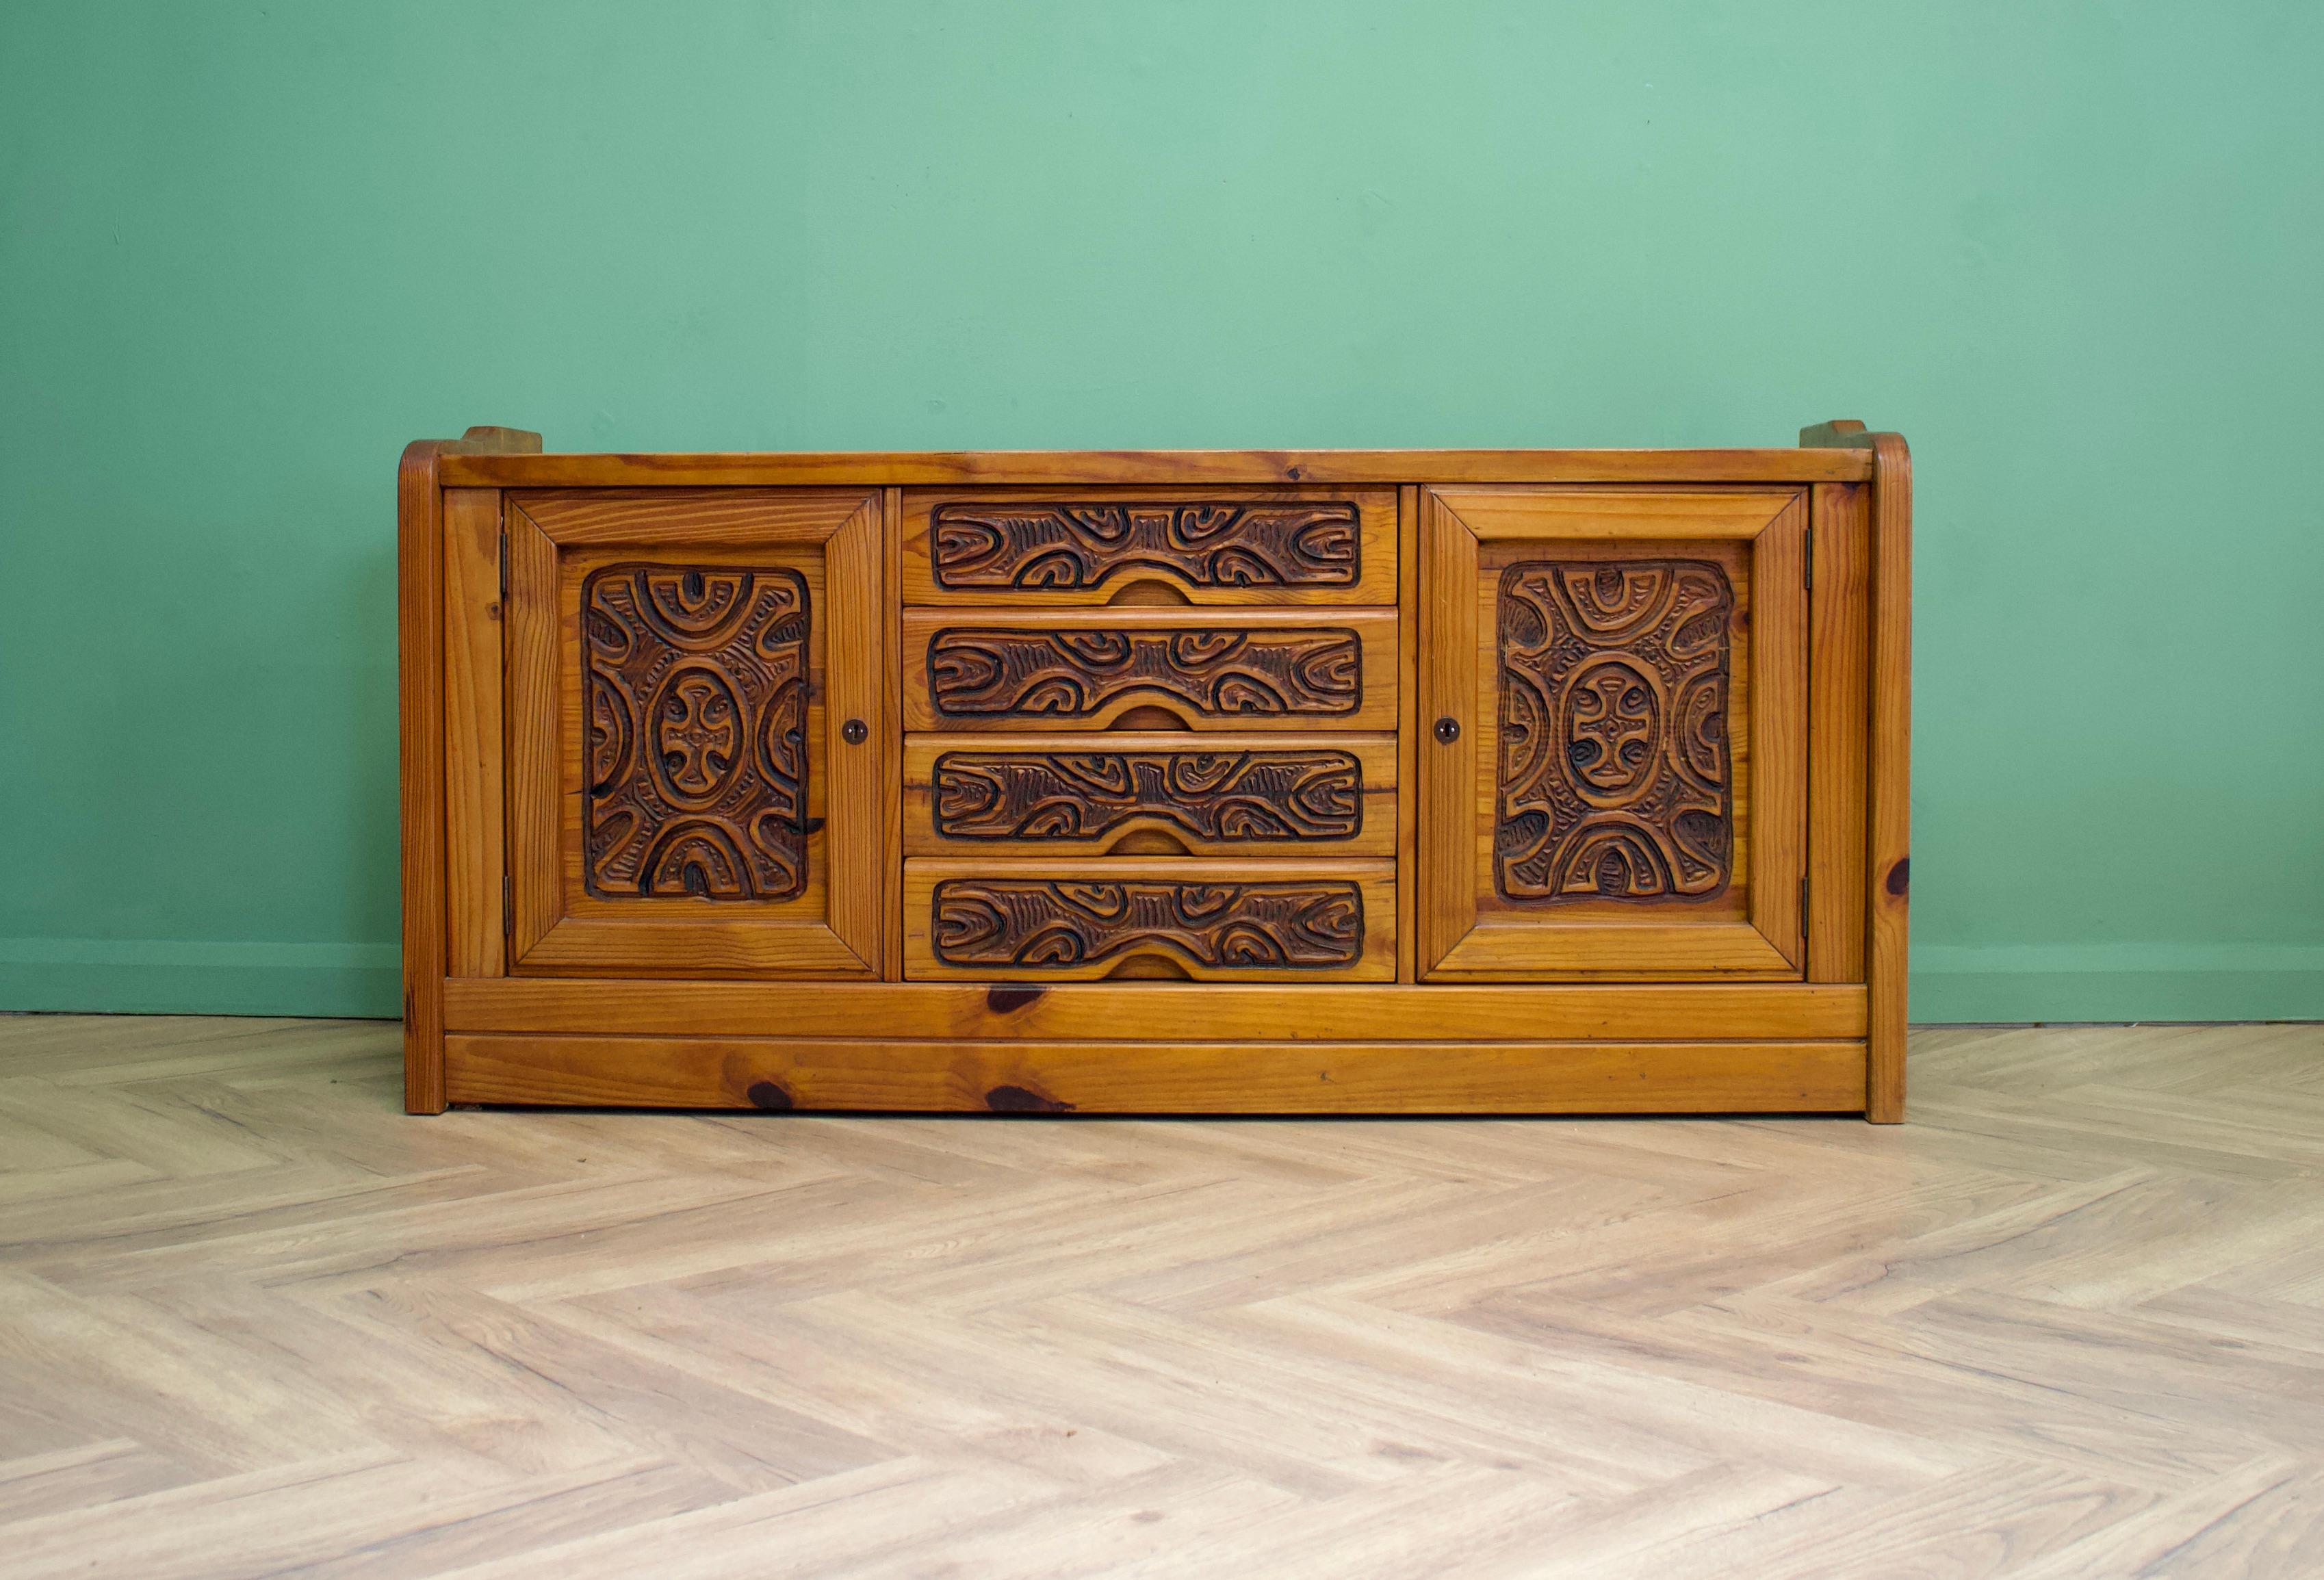 A pine or yellow wood sideboard - made in South Africa during the 1970s

In the Brutalist style